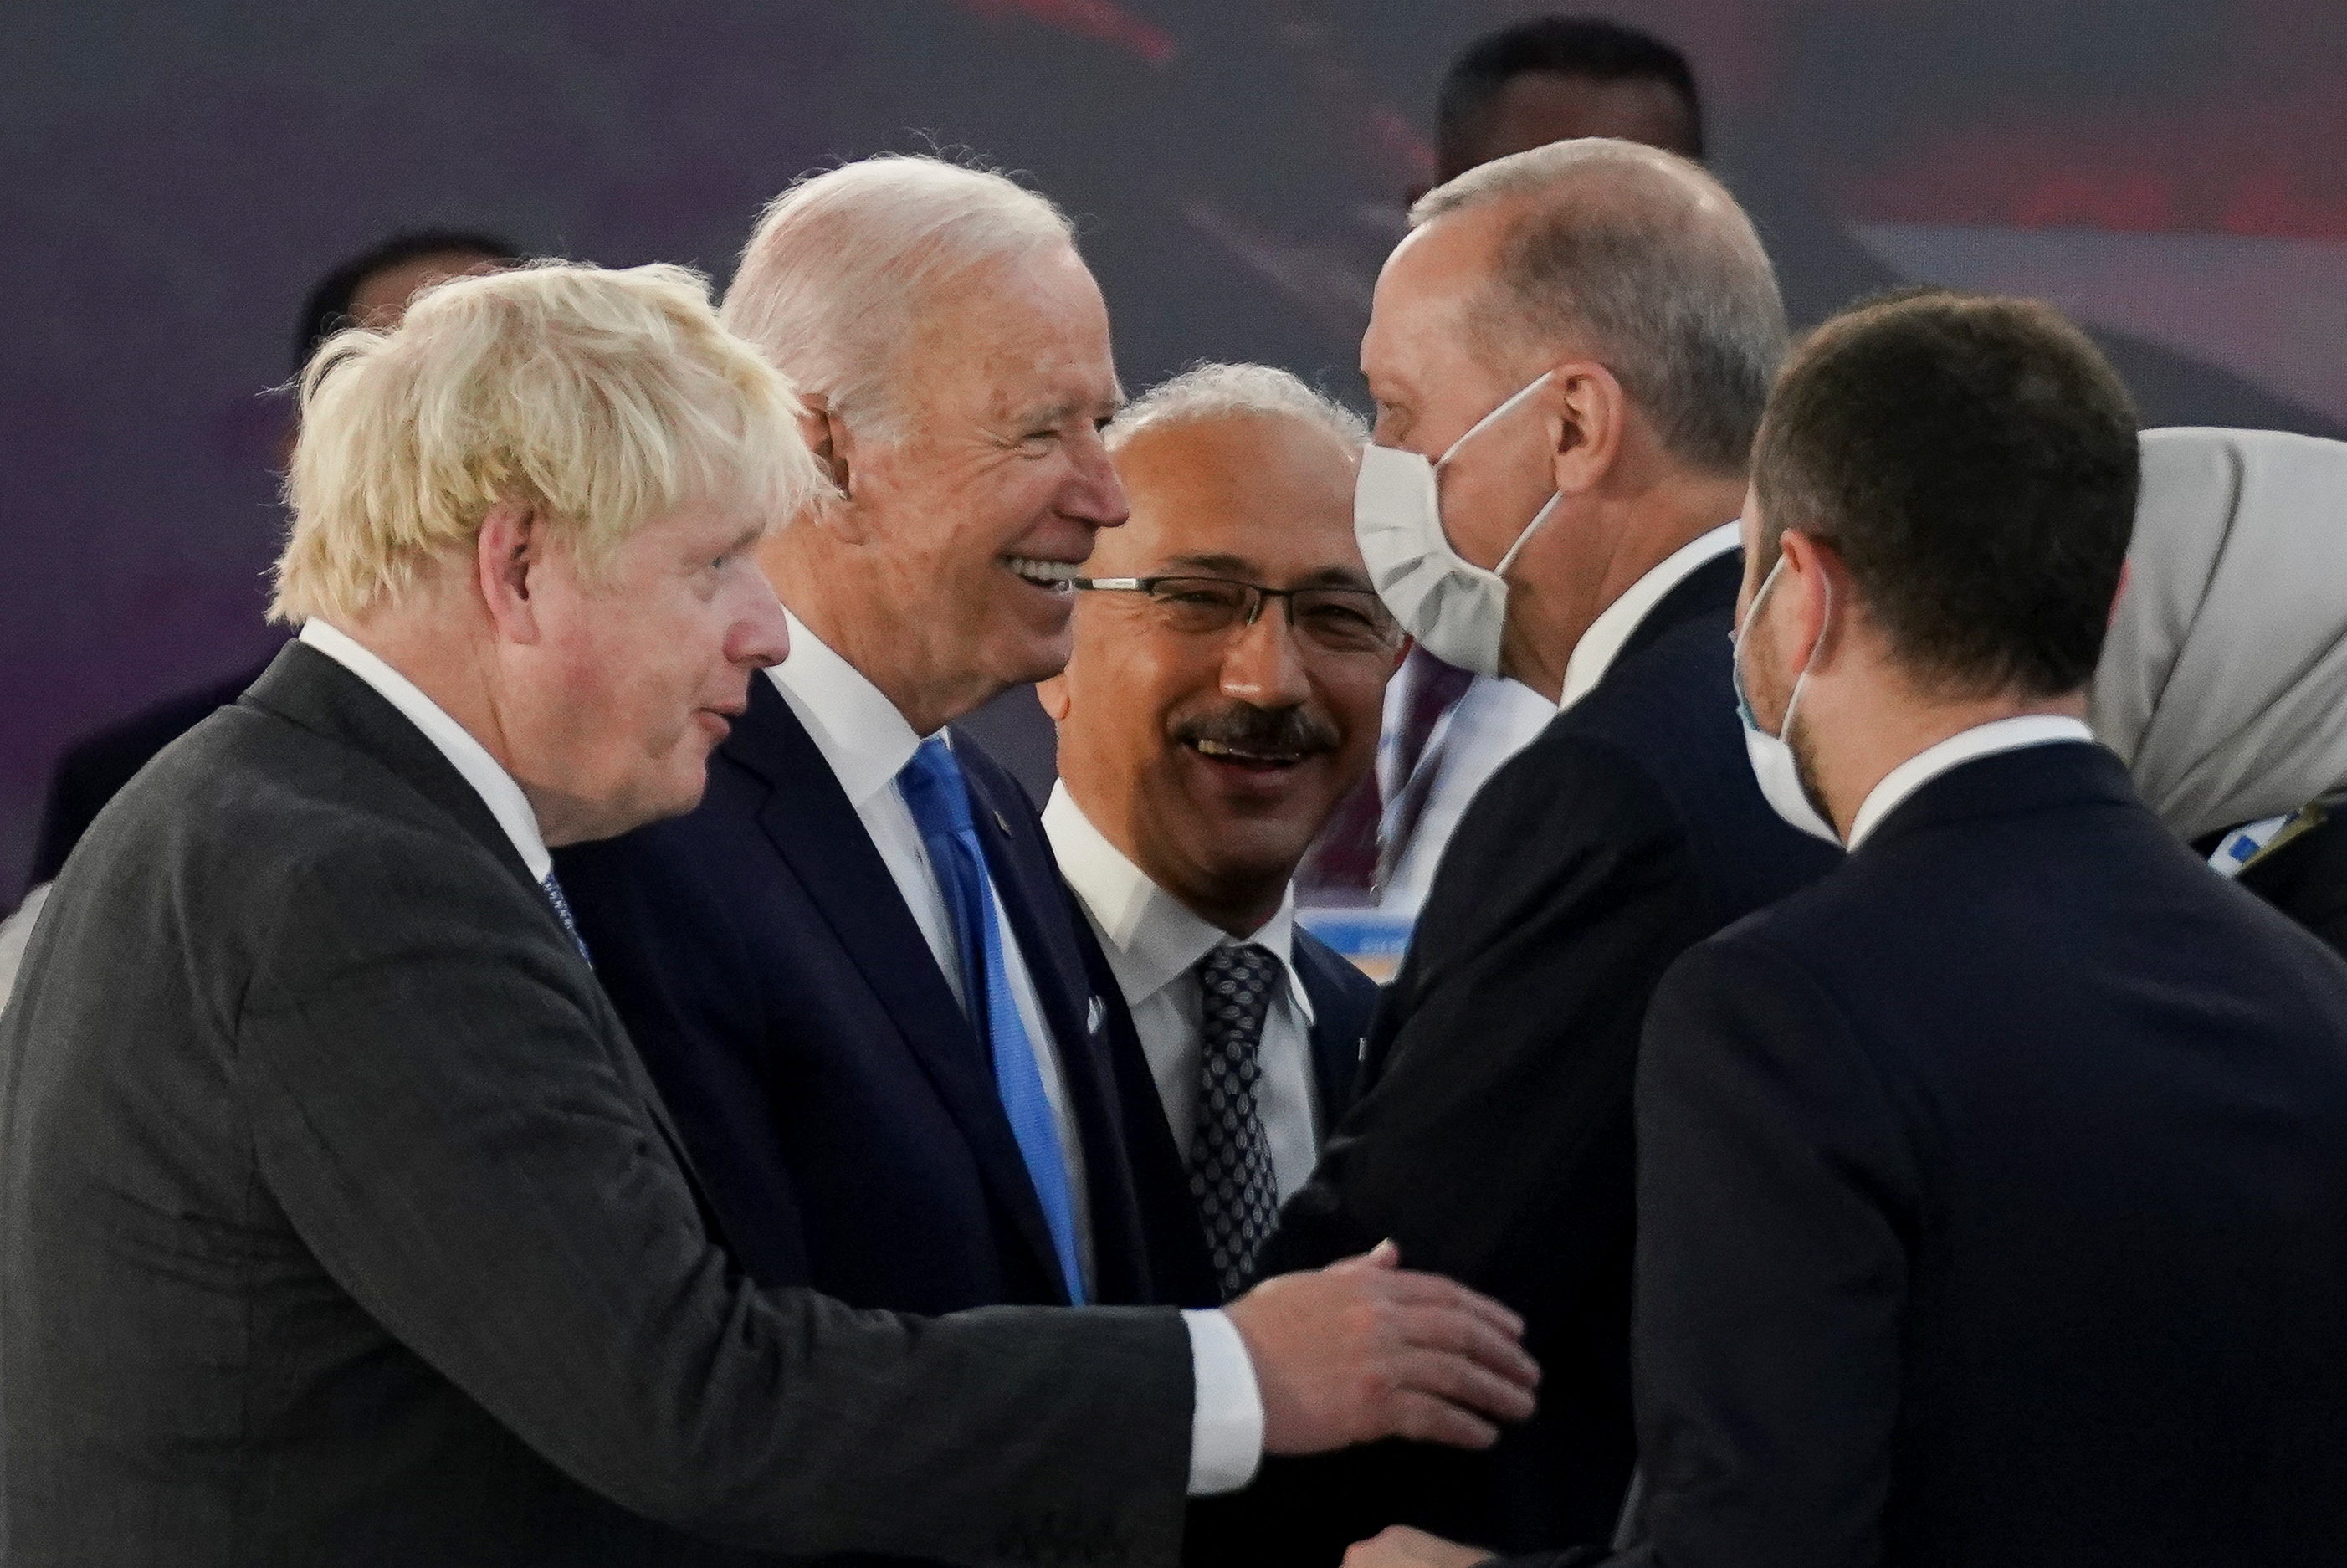 U.S. President Joe Biden talks with Turkey's President Tayyip Erdogan and Britain's Prime Minister Boris Johnson as he attends the G20 leaders' summit in Rome, Italy October 30, 2021. REUTERS/Kevin Lamarque/Pool